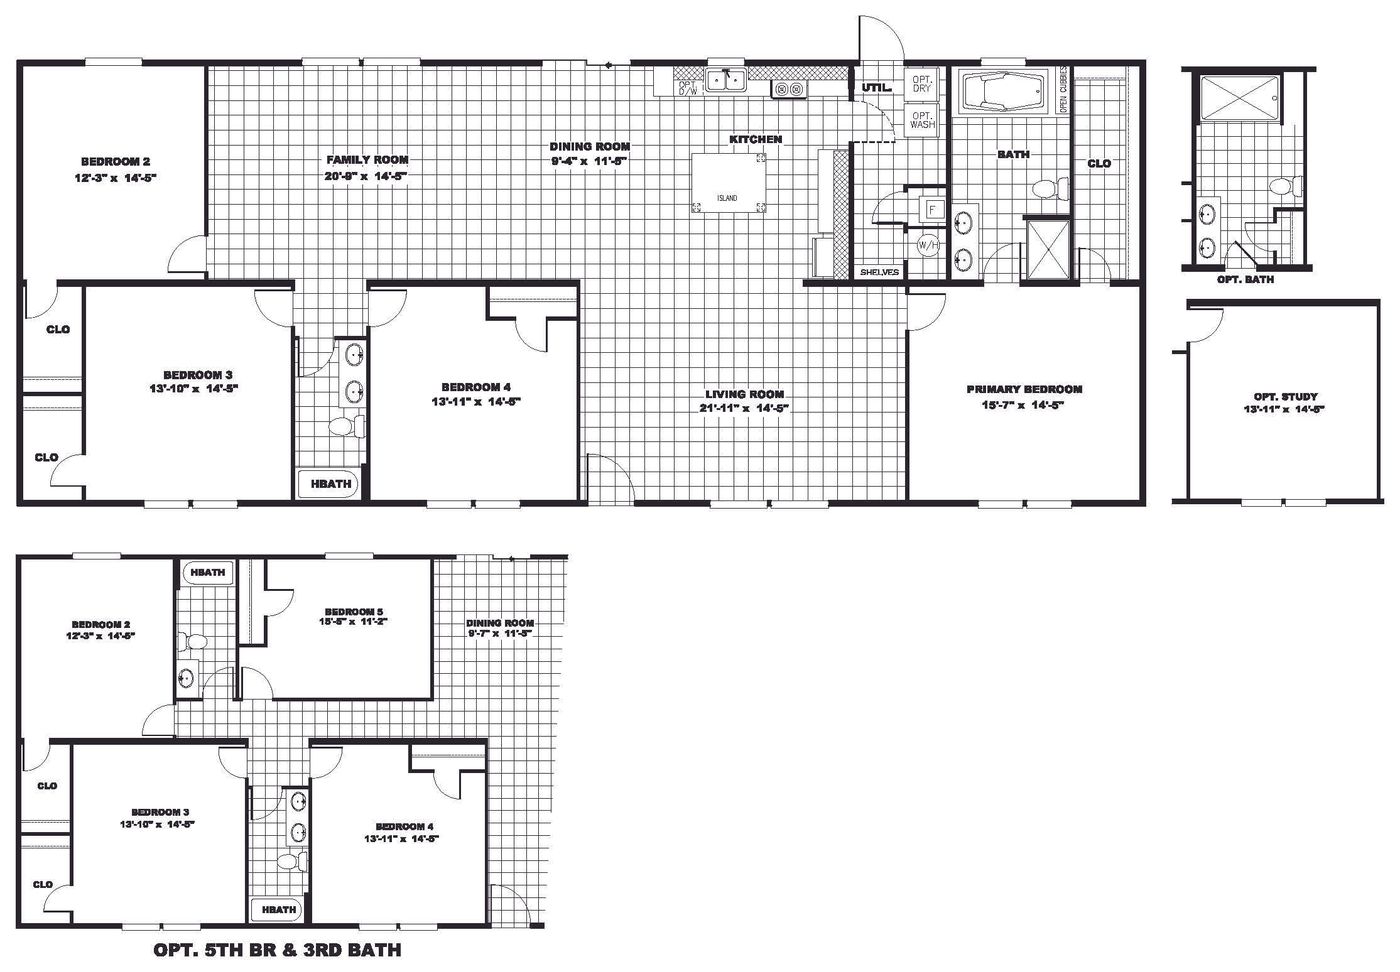 The ULTRA PRO BIG BOY 4 BR 32X76 Floor Plan. This Manufactured Mobile Home features 4 bedrooms and 2 baths.